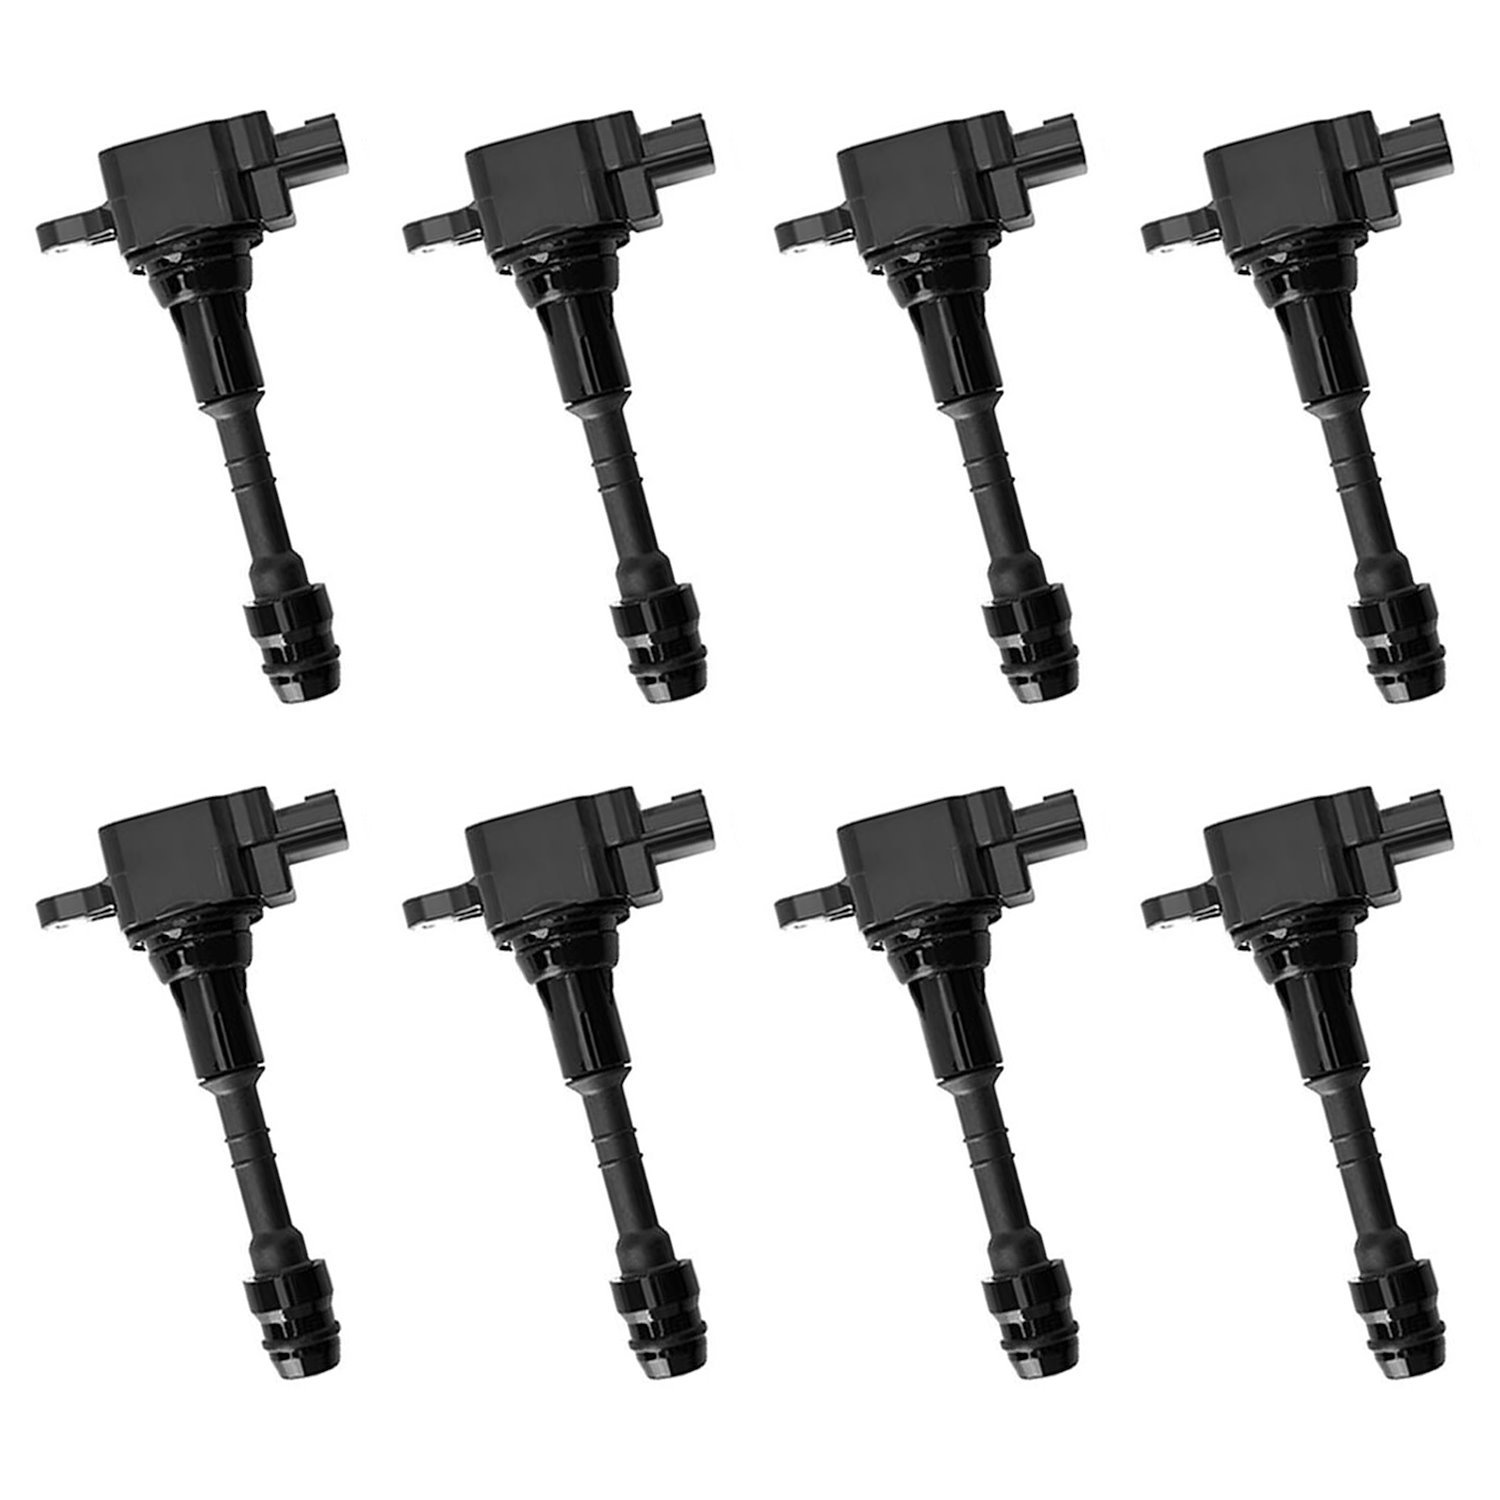 OE Replacement Ignition Coils for 2004-2007 Nissan Titan 5.6L